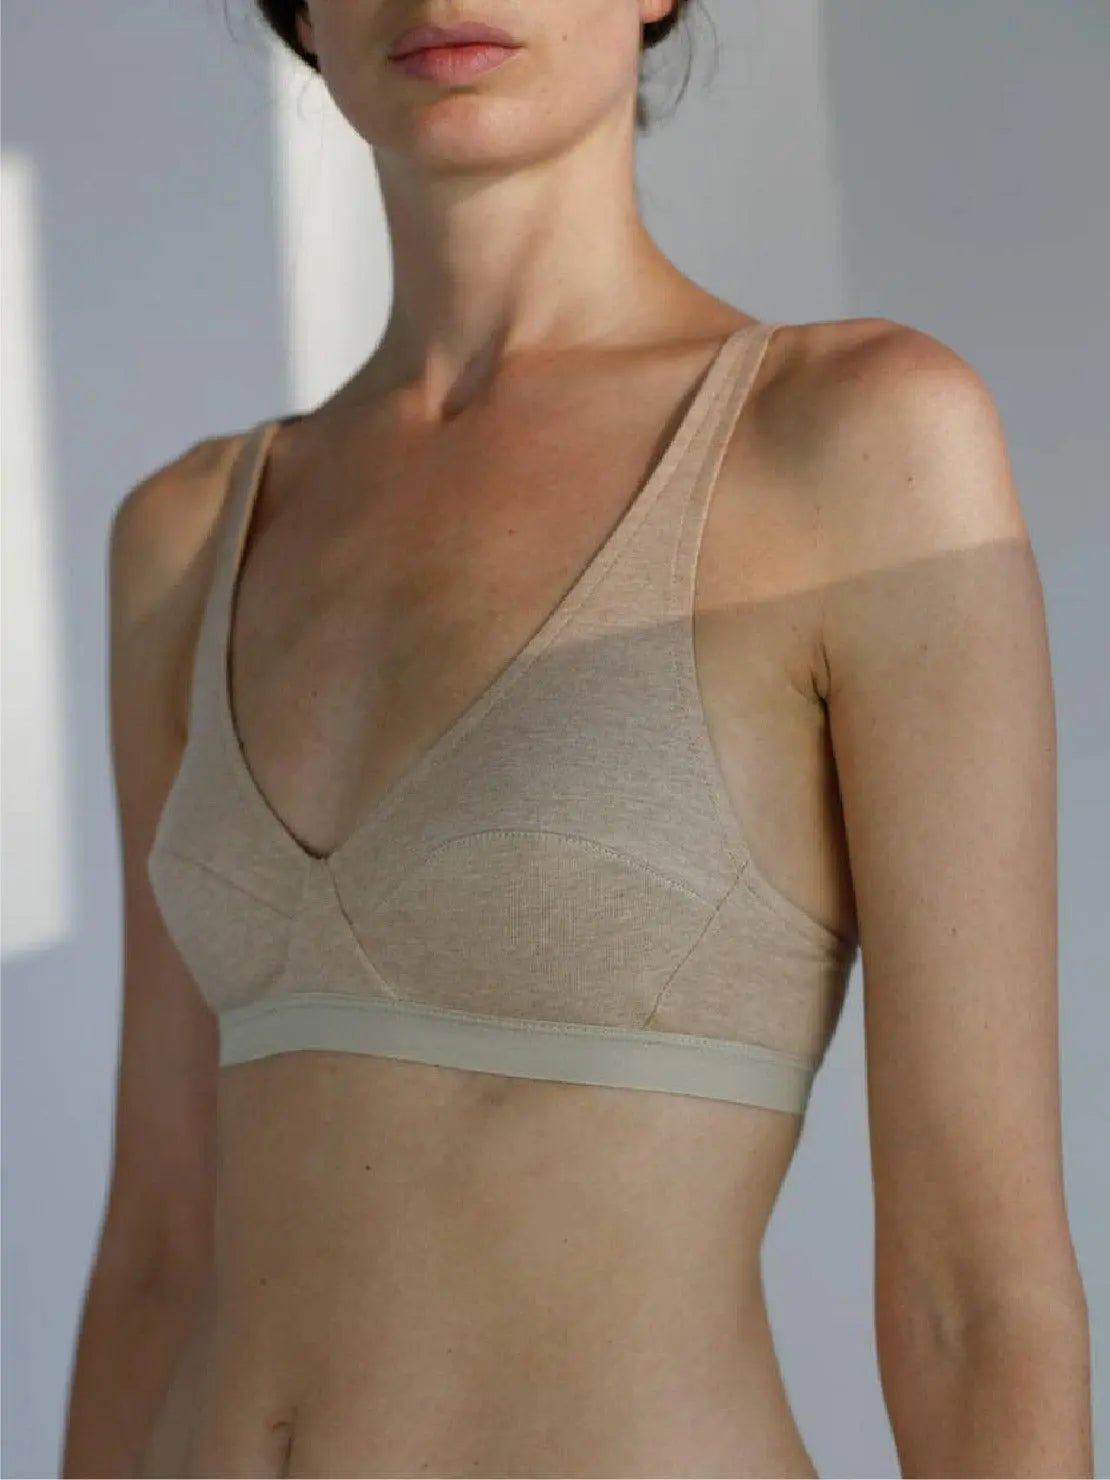 A person wearing an Earth Mia Organic Cotton Bra - Talk Under Light with a deep V-neckline and wide straps is seen from the shoulders up, possibly browsing in a Barcelona store. The person has a slender build and stands against a neutral background, while the lighting creates shadows and highlights on the skin and fabric.